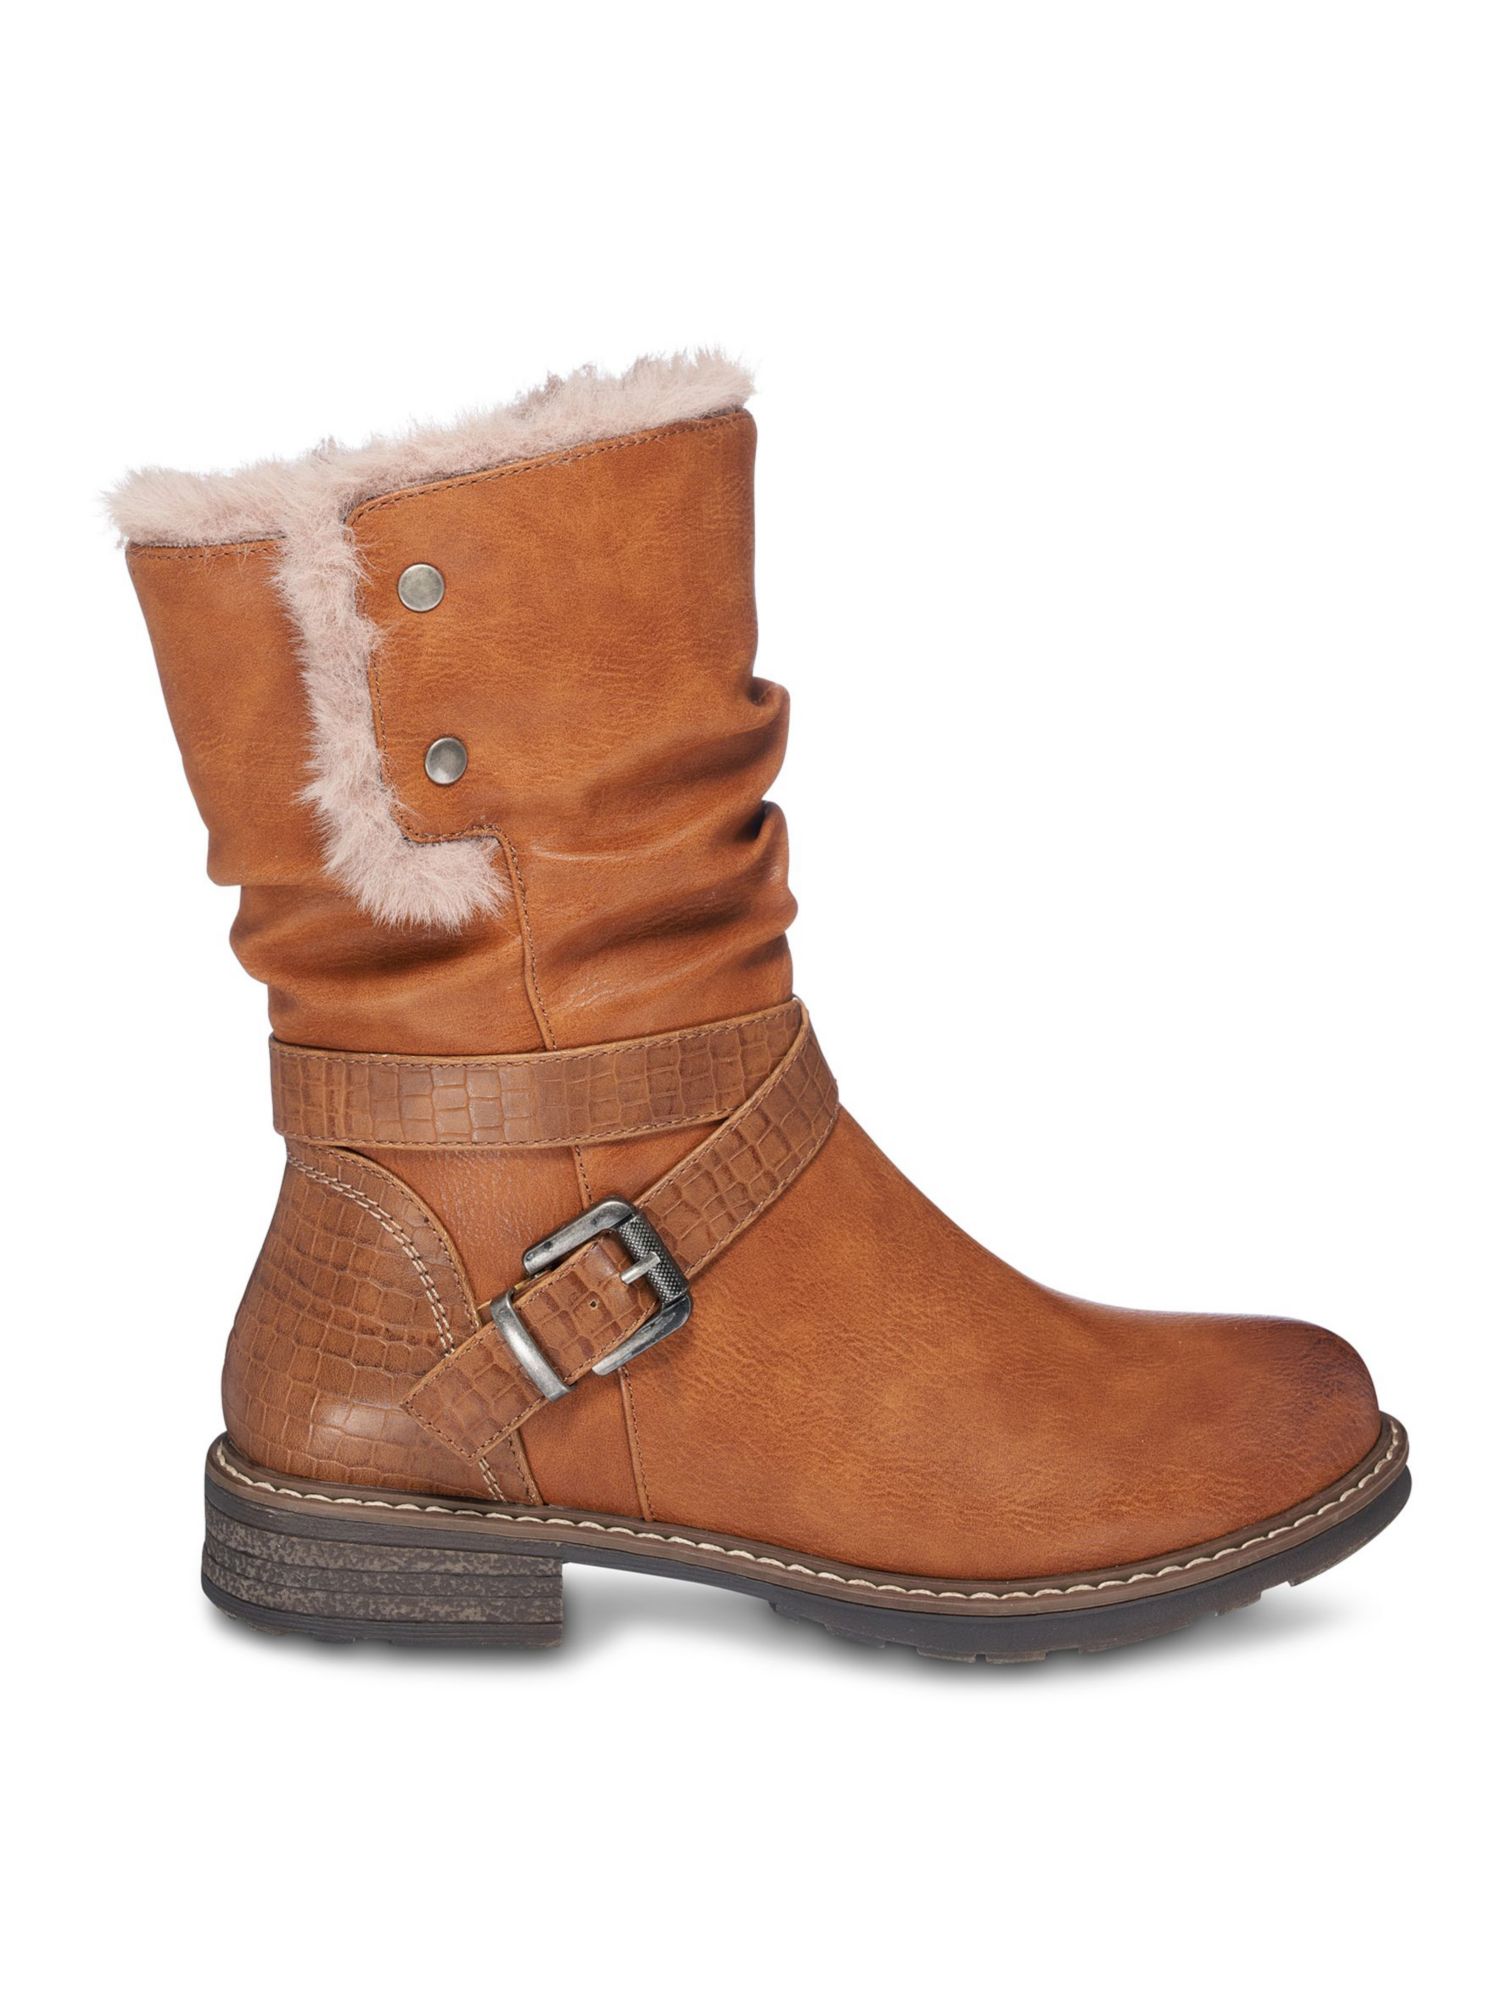 G.C. SHOES Womens Brown Sherpa Slip Resistant Buckle Accent Round Toe Snow Boots 9